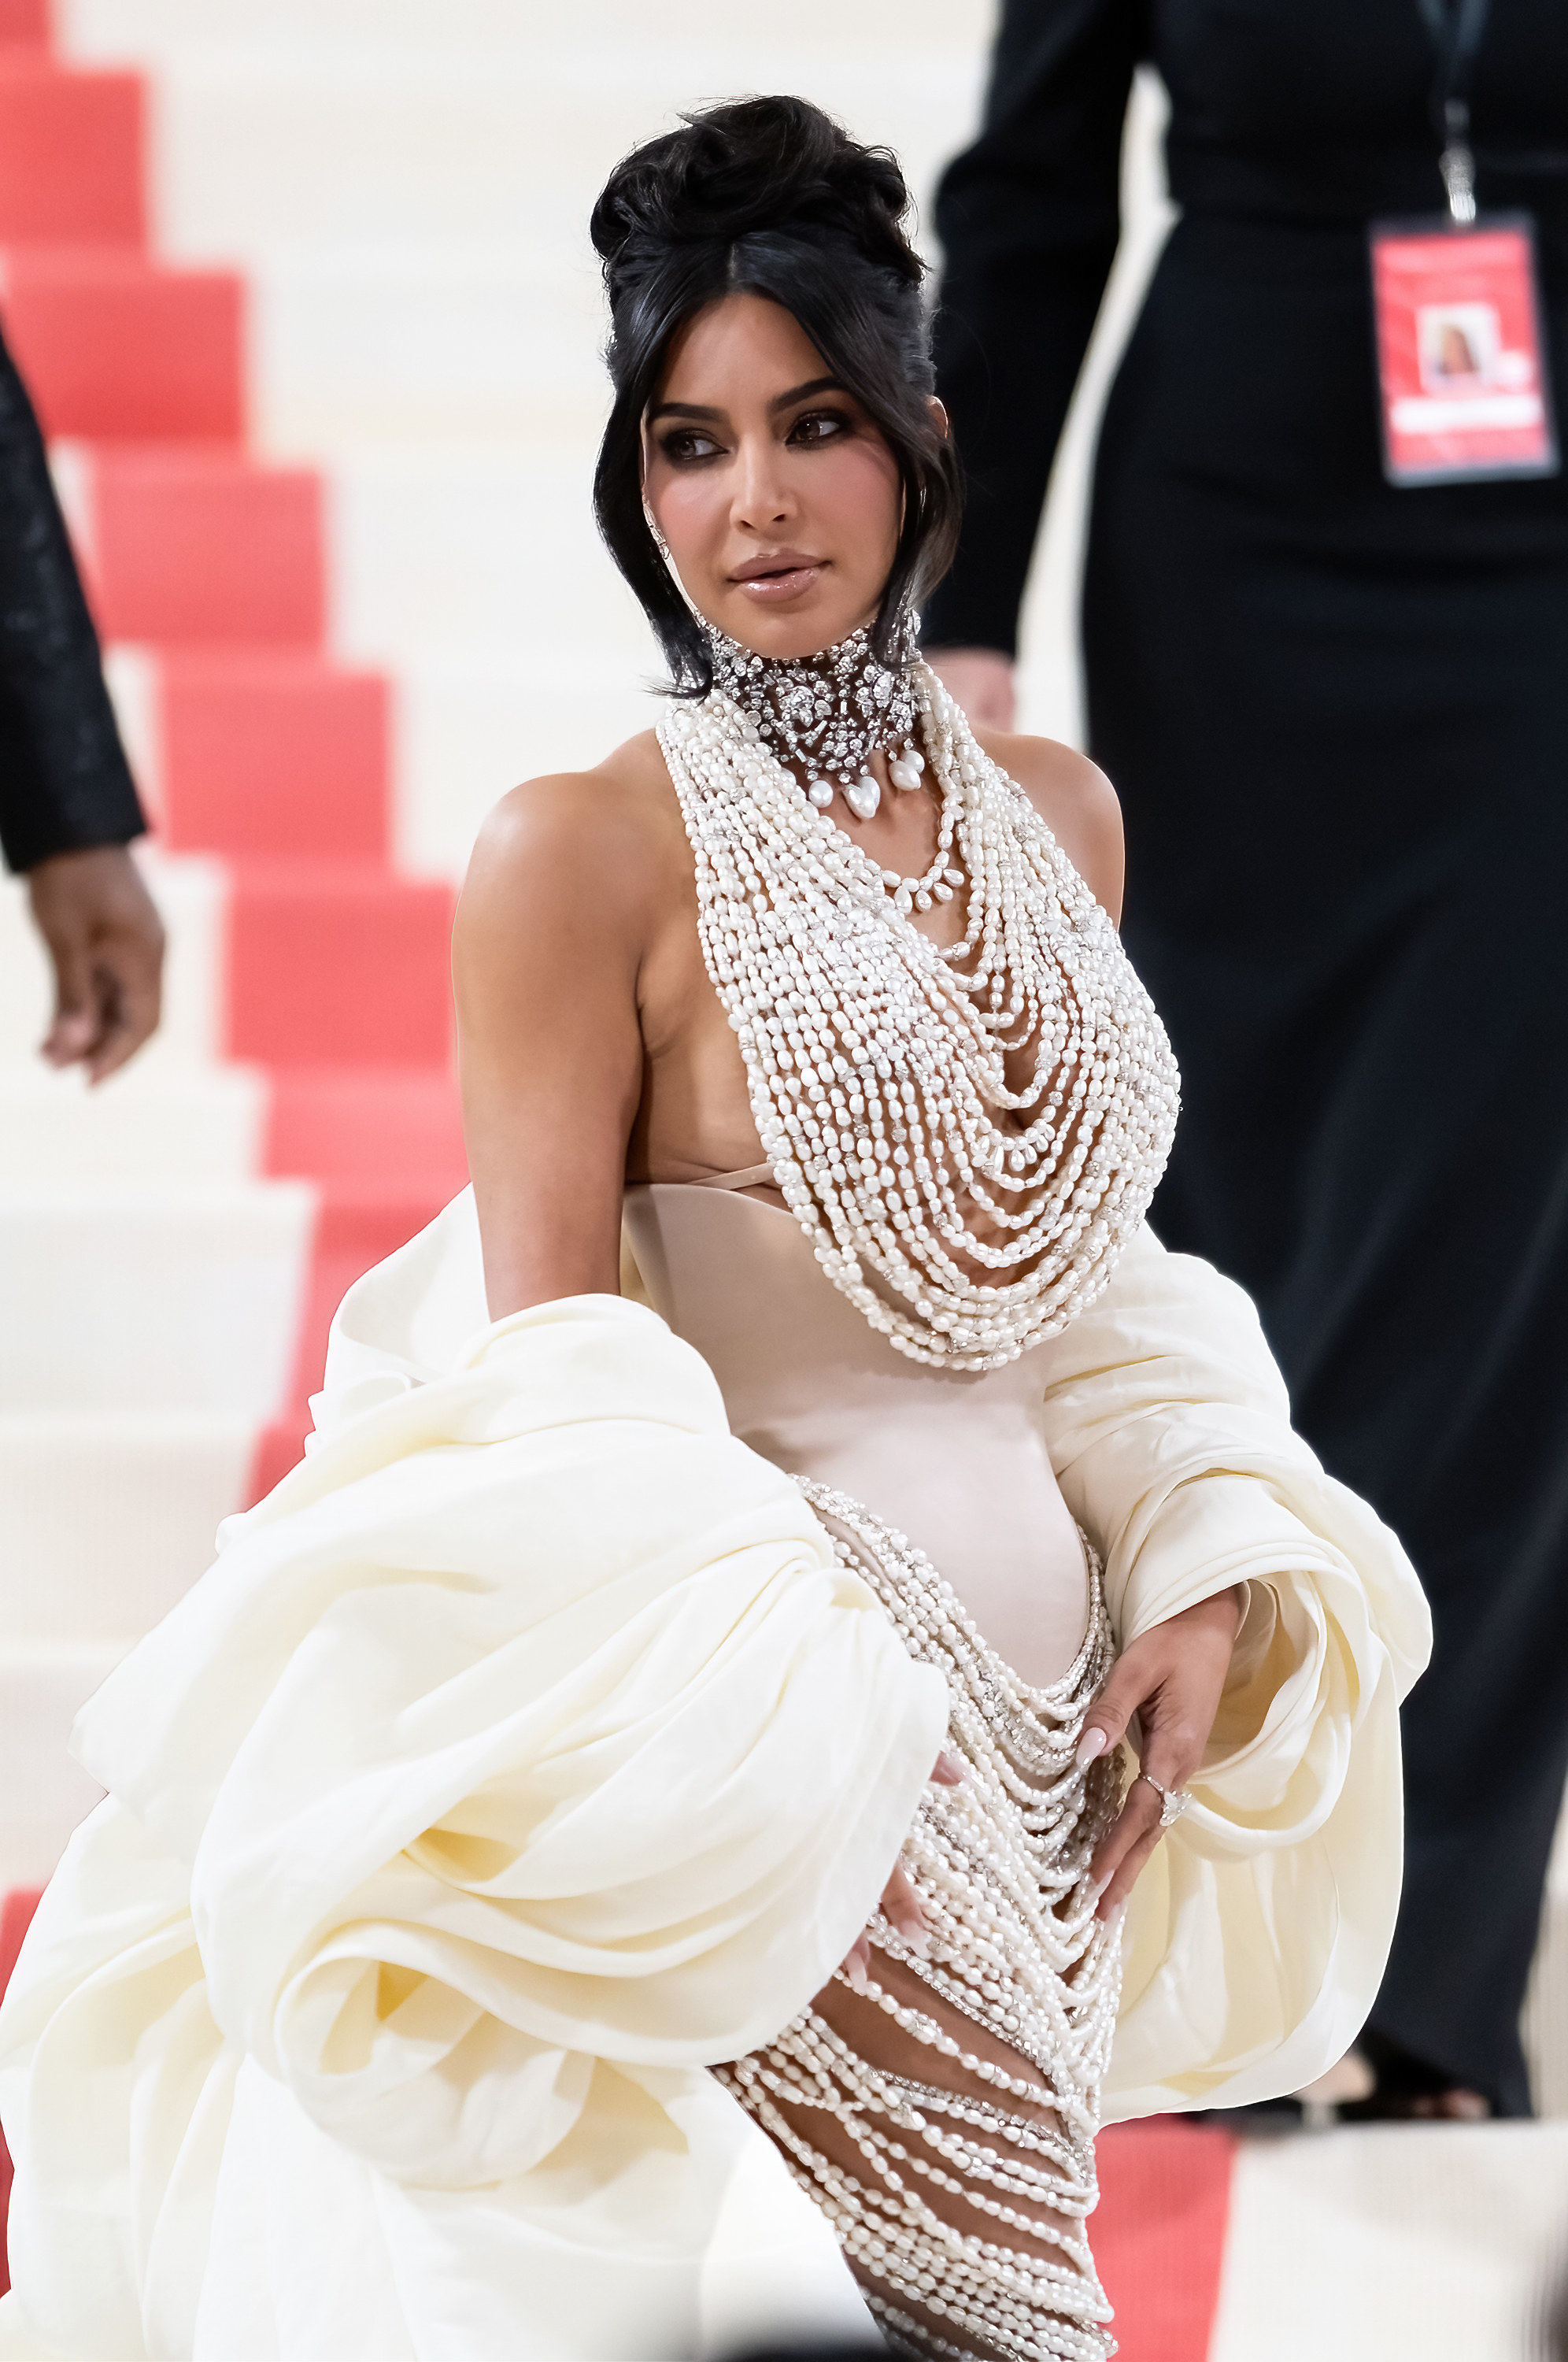 Kim dripping in pearls on the top and bottom of her corset last night